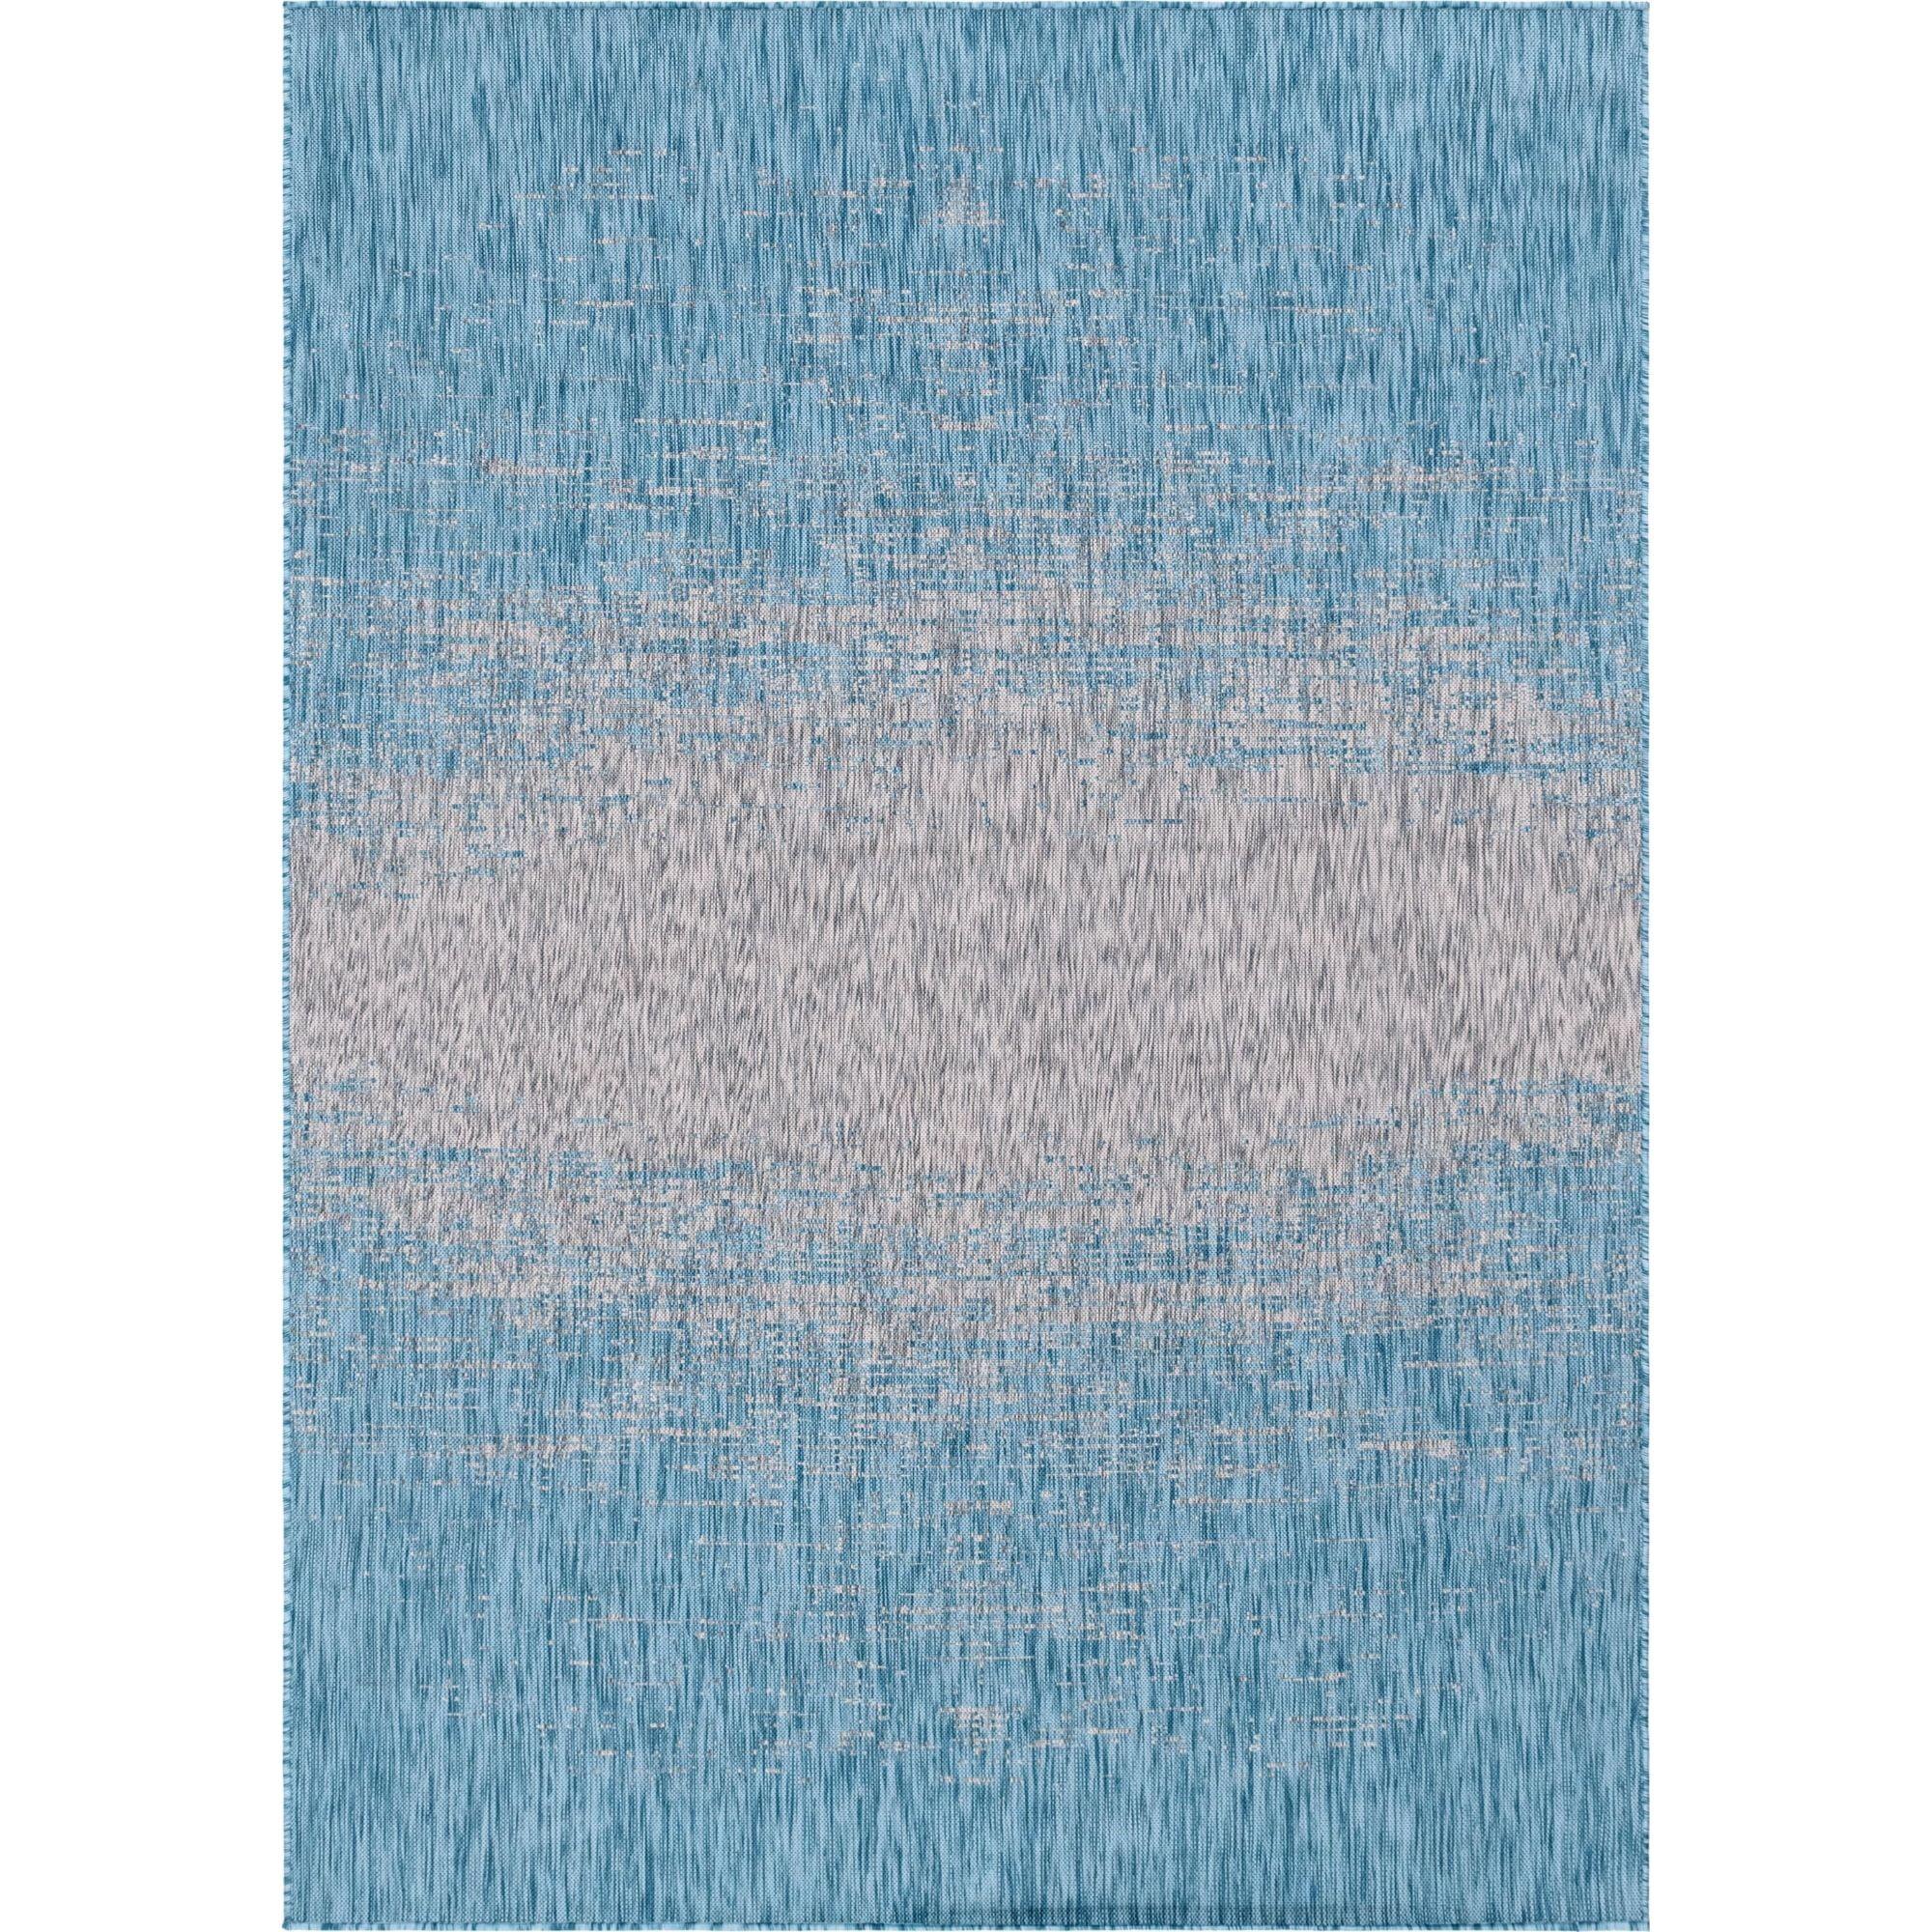 Aqua Serenity Easy-Care Outdoor Rug, 7' x 10', Synthetic Weave